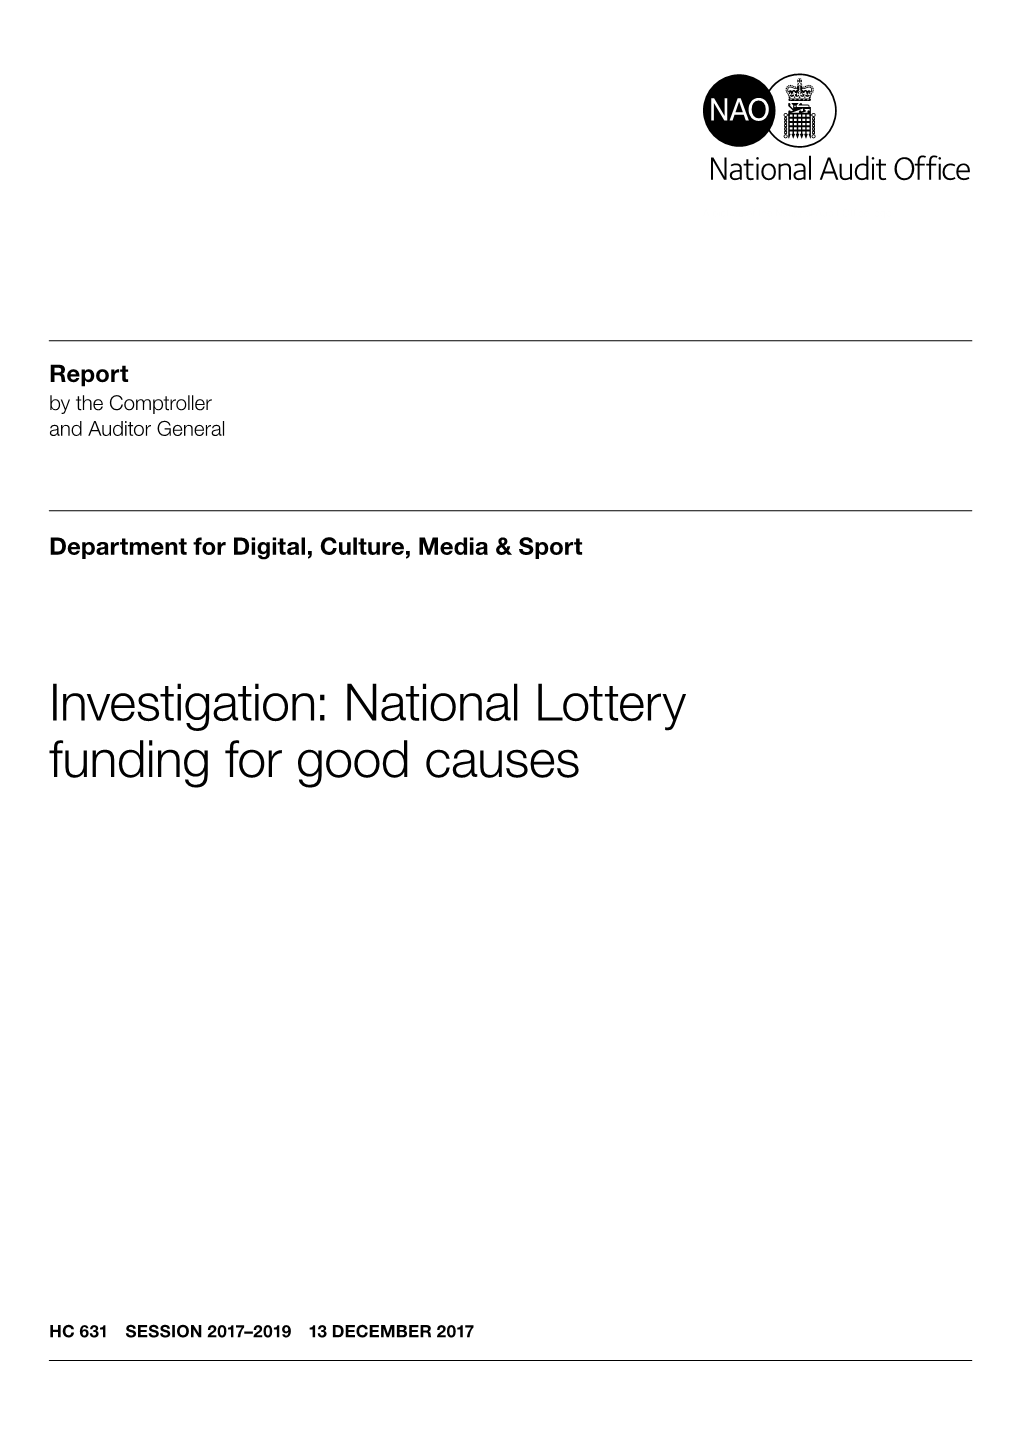 Investigation National Lottery Funding for Goood Causes